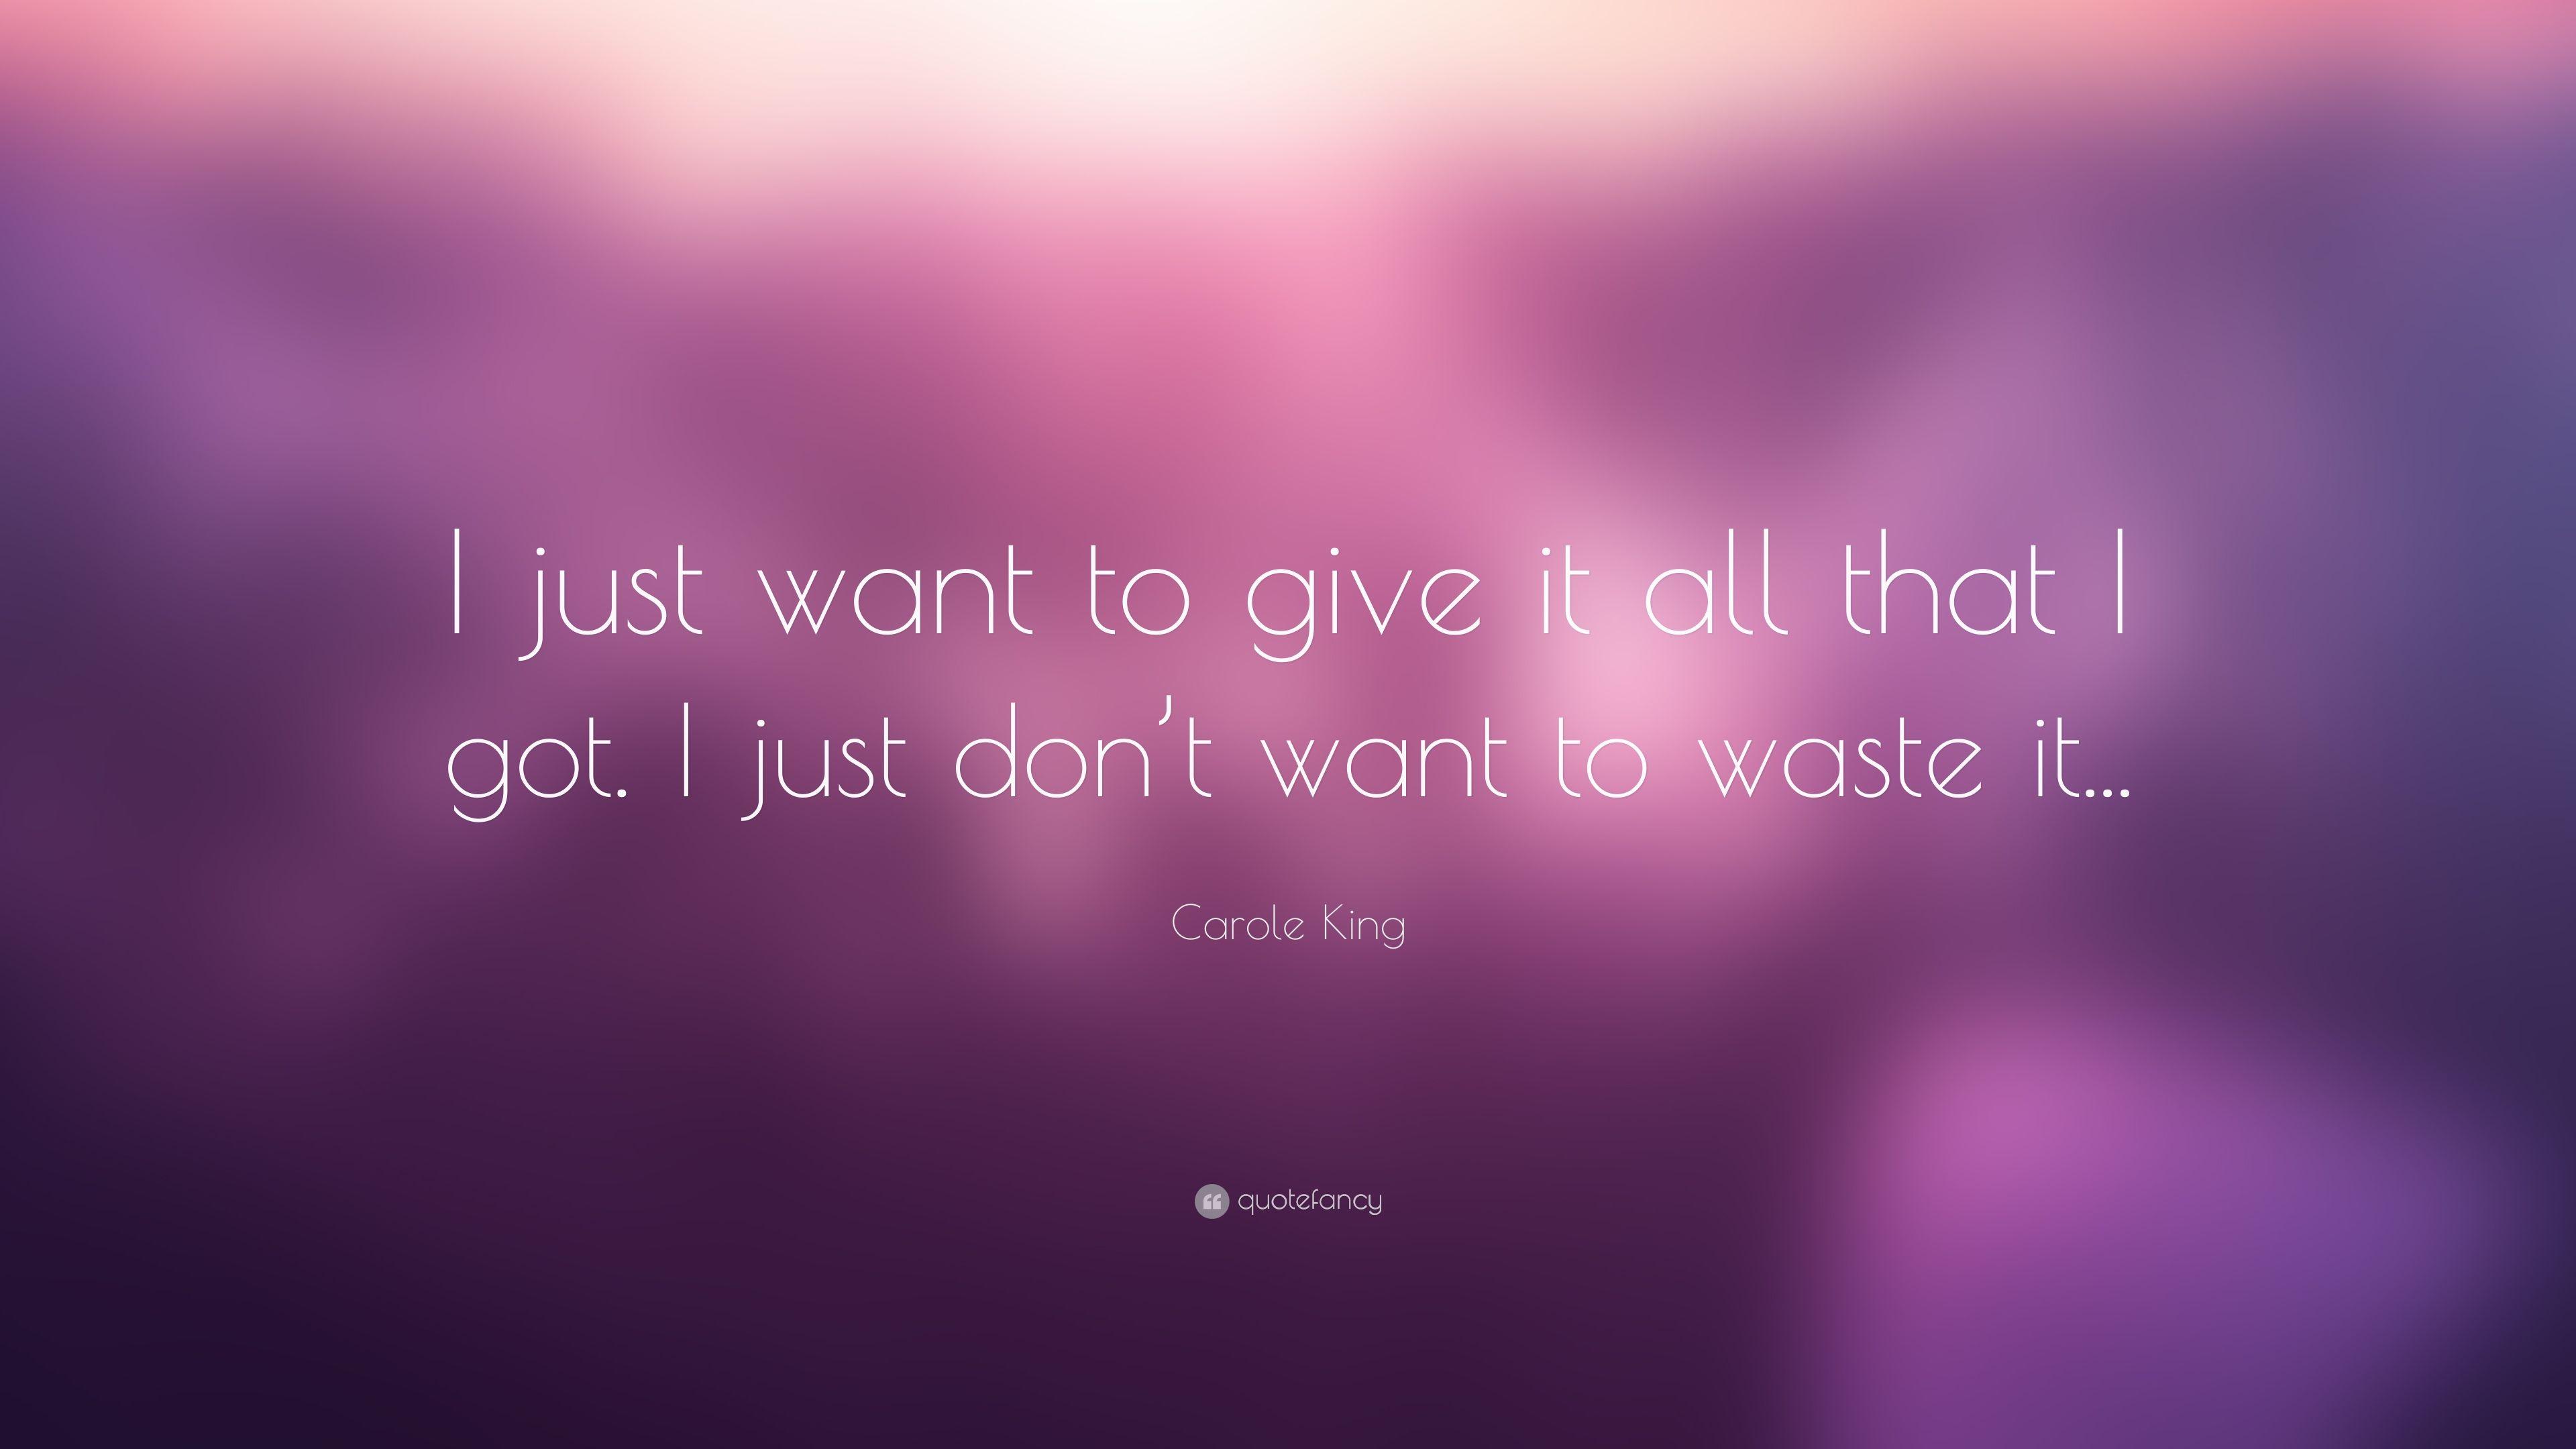 Carole King Quote: “I just want to give it all that I got. I just